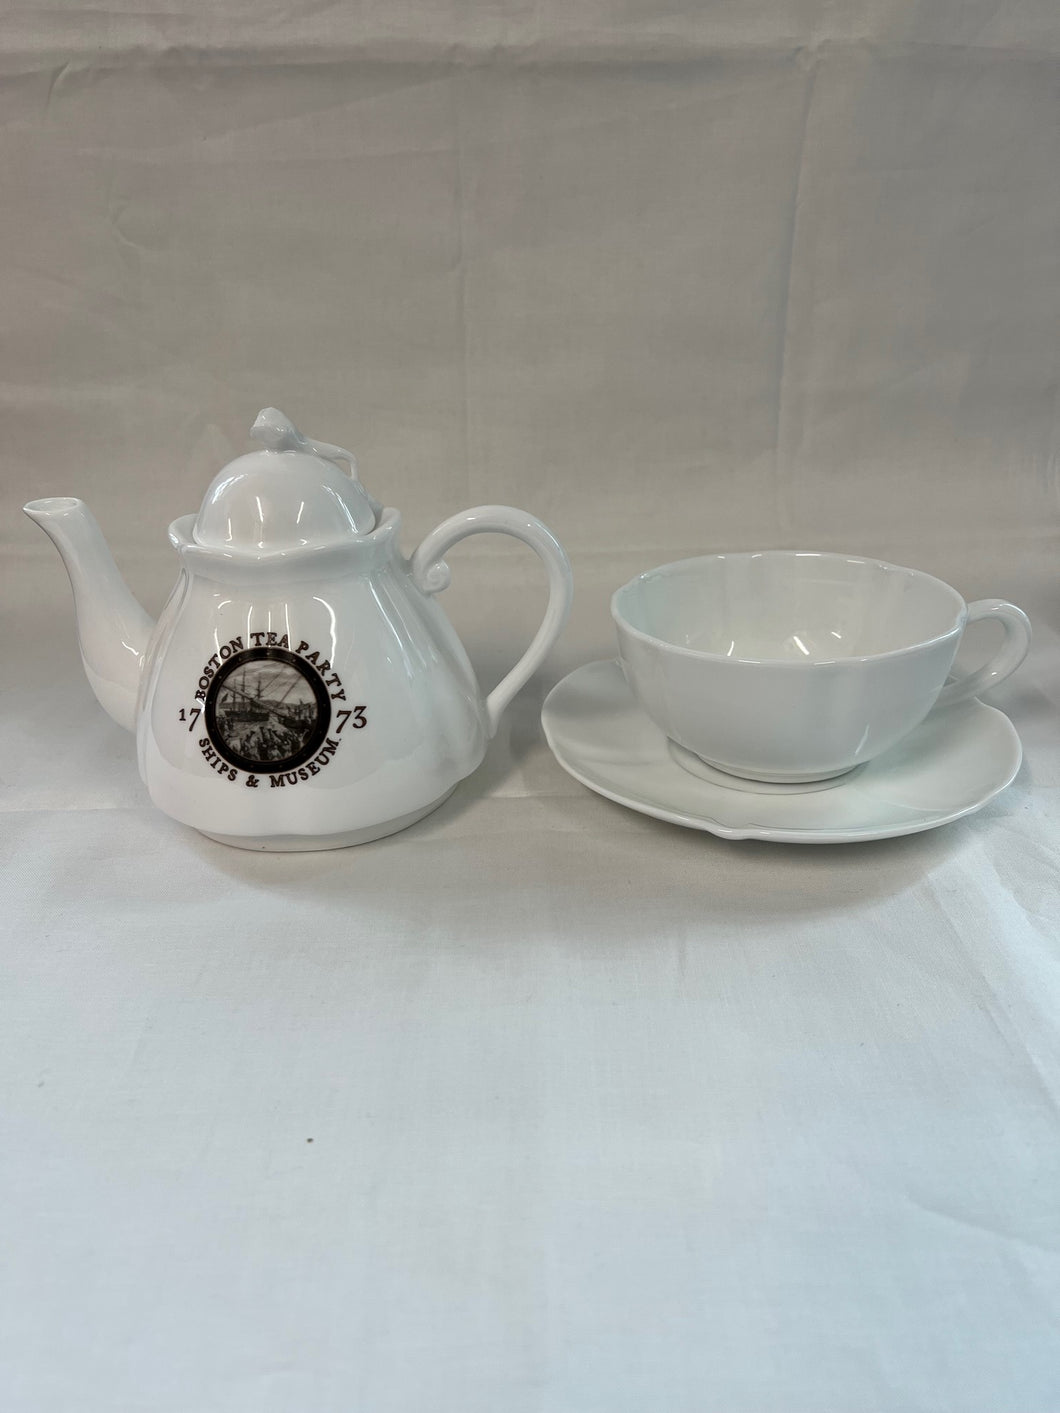 Teapot – This & That Props Inc